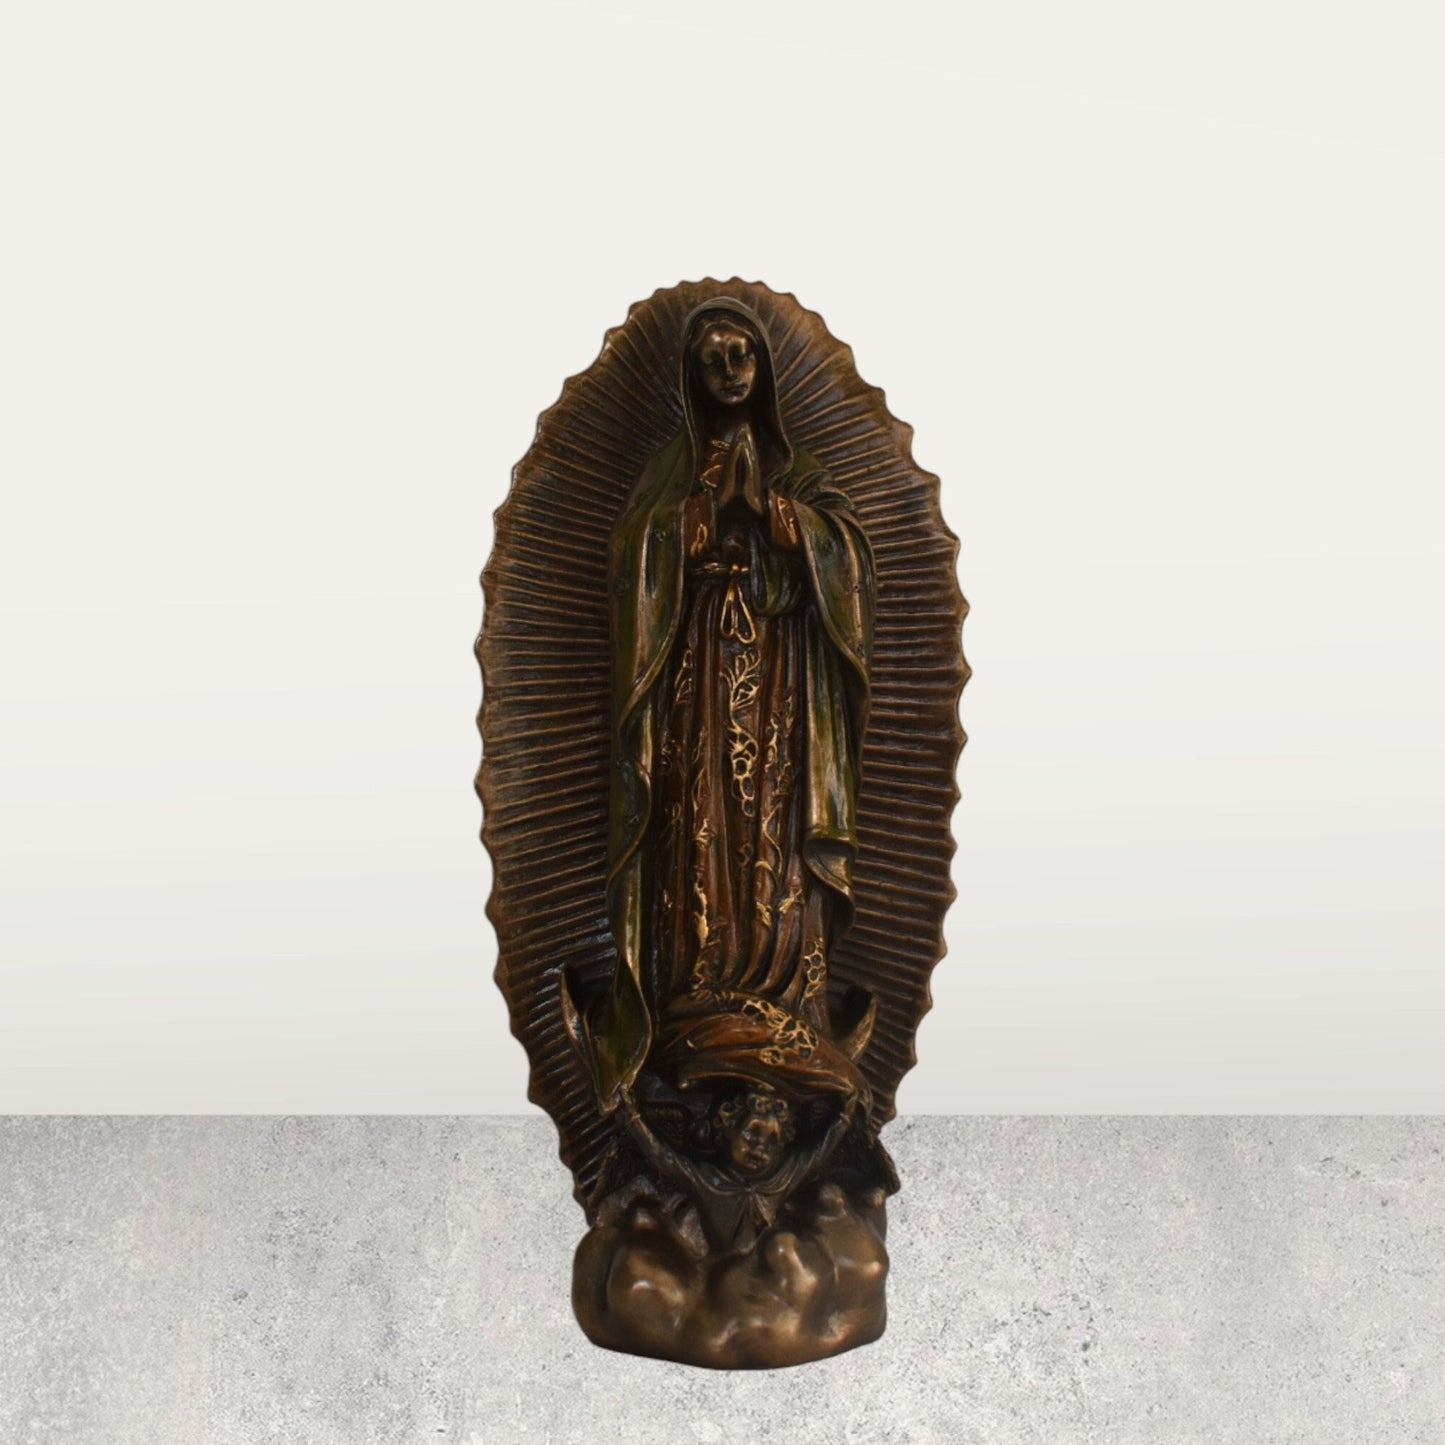 Our Lady of Guadalupe - Commemorates the appearance of Mary to the Mexican peasant Juan Diego in 1531 - Cold Cast Bronze Resin